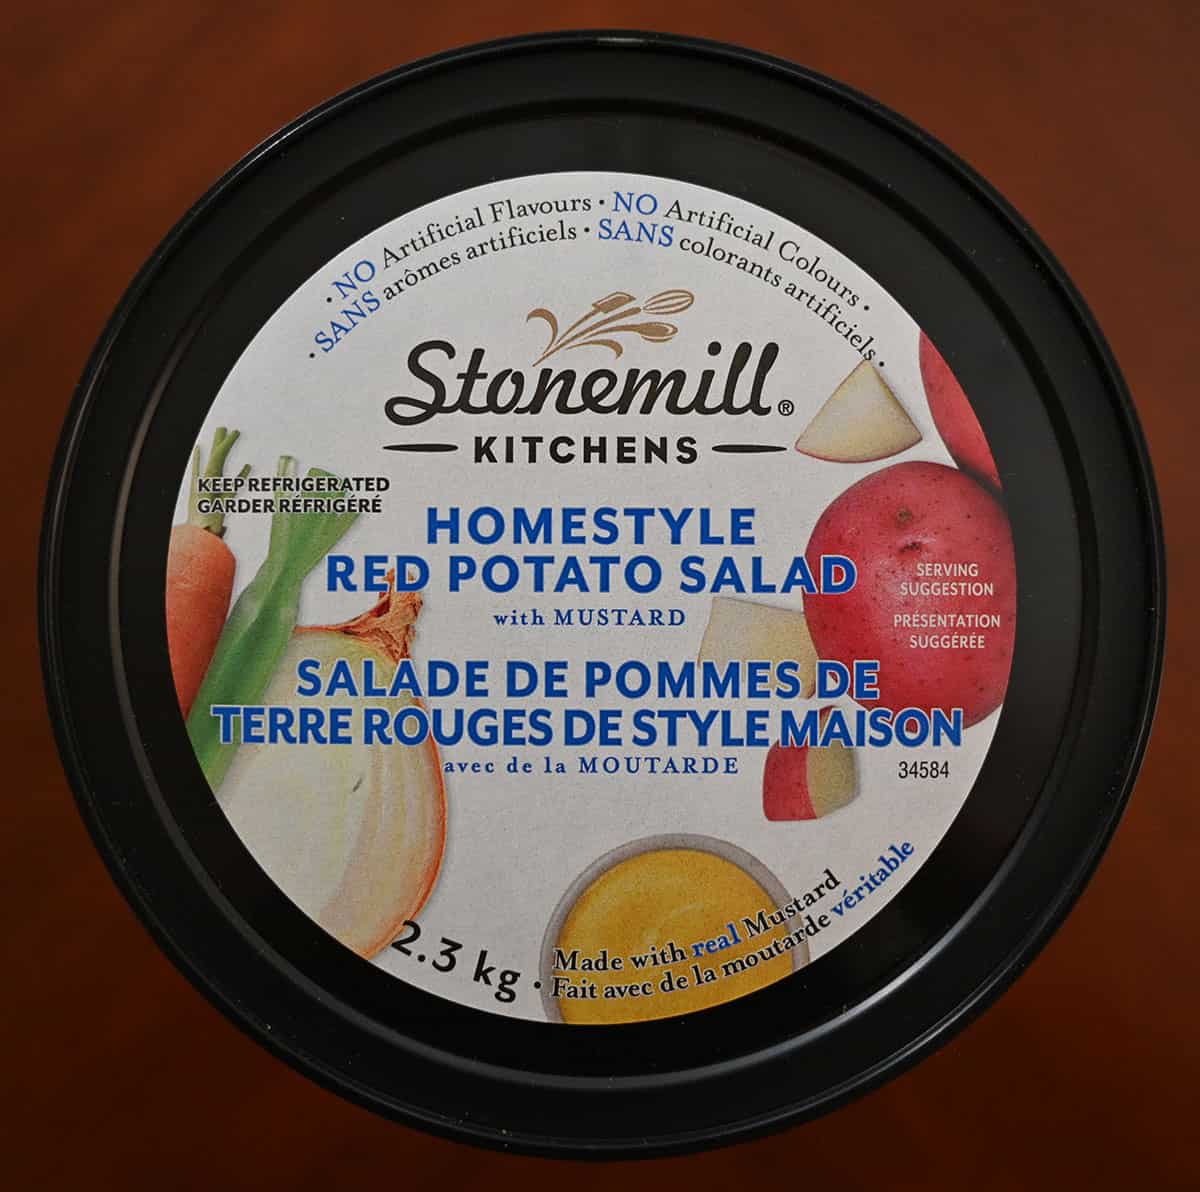 Image of the lid of the Costco Stonemill Kitchens Homestyle Red Potato Salad showing that it has no artificial colours or flavours.